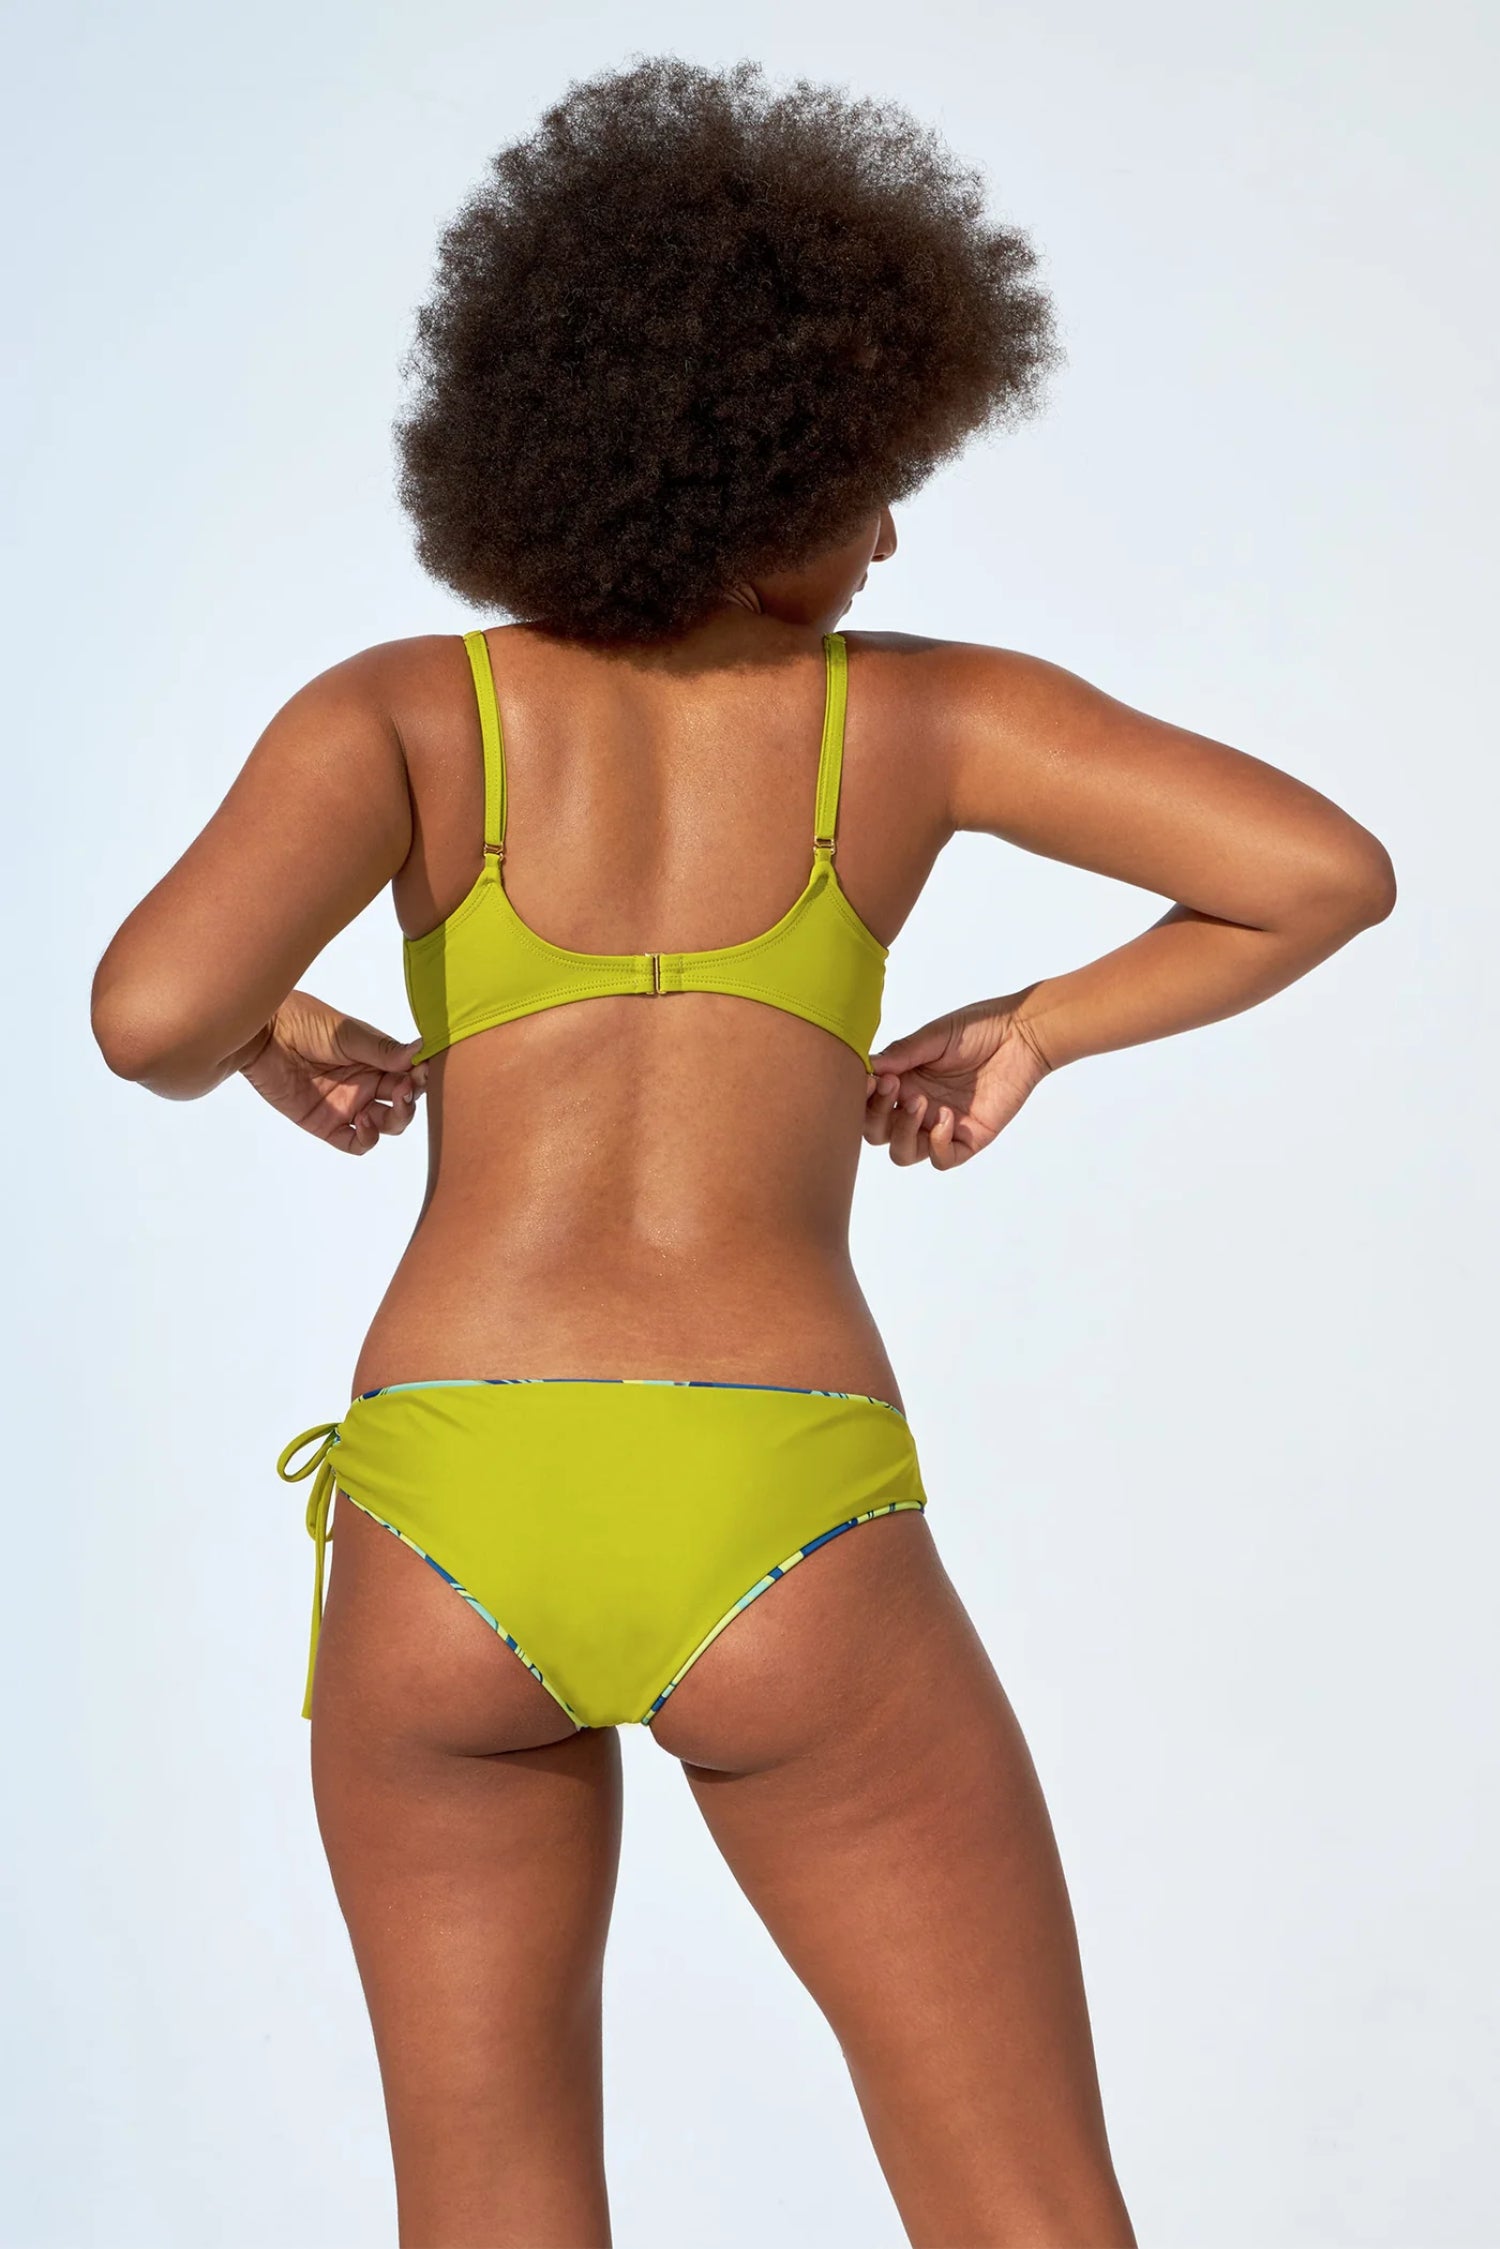 Beatrice Bikini Top by Selfish Swimwear, Lime Green, back view, adjustable straps, fully lined, recycled nylon, UV protection, sizes XS to XXL, made in Montreal